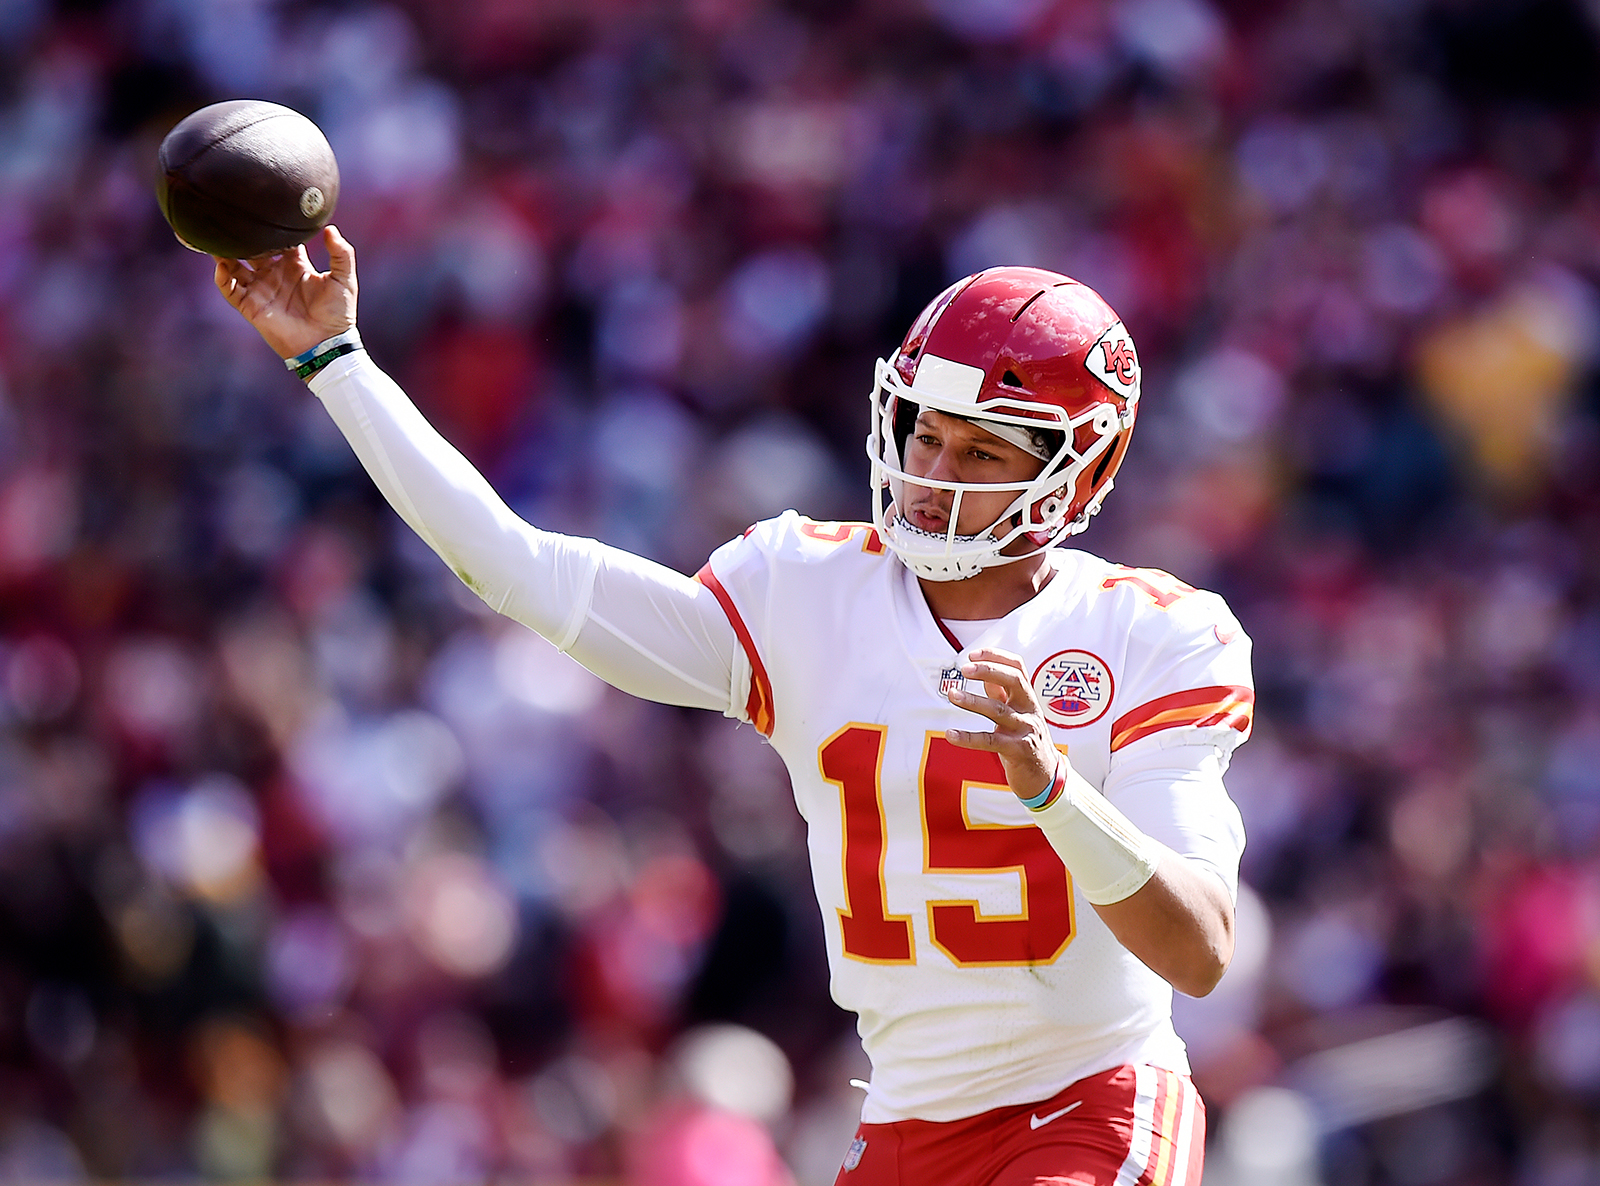 Kansas City Chiefs QB Patrick Mahomes throws against the Washington Football Team during the second quarter at FedExField on October 17. 